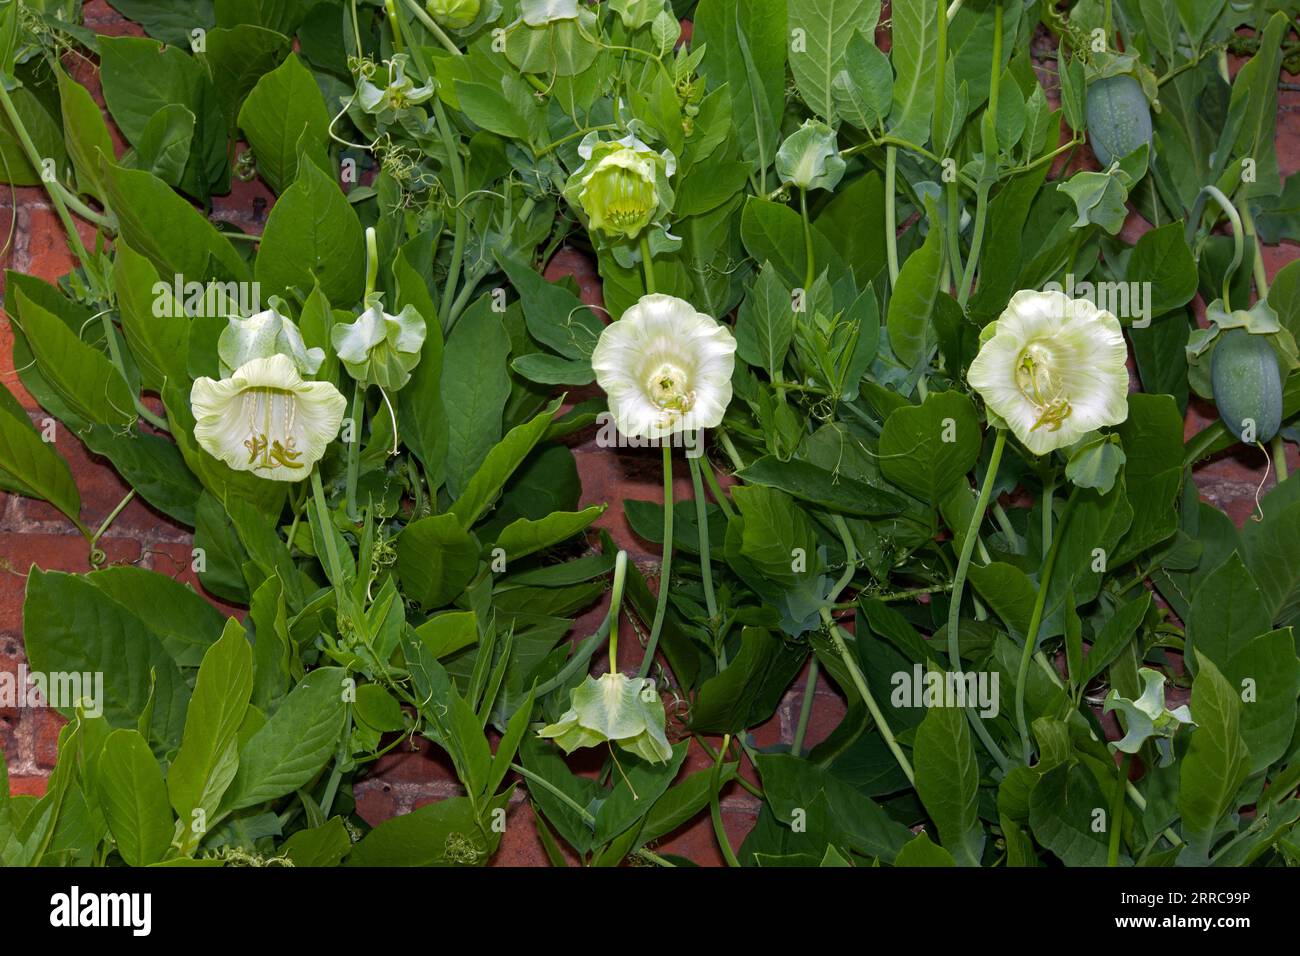 Cobaea scandens f.alba (cup-and-saucer vine) is native to tropical central and South America. It is now widely cultivated for its ornamental flowers. Stock Photo